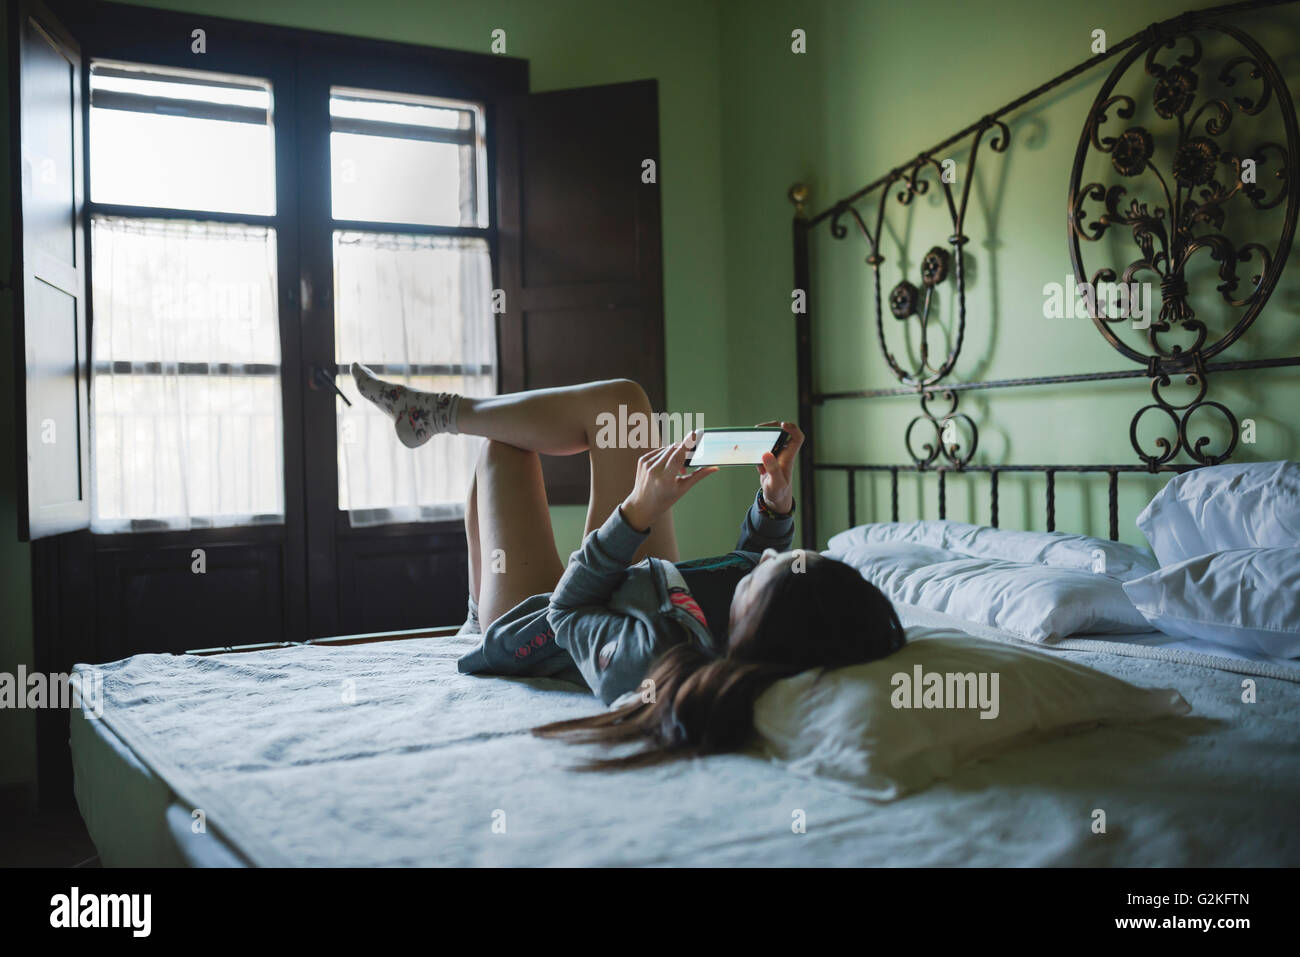 Woman Lying in Bed using smartphone Banque D'Images